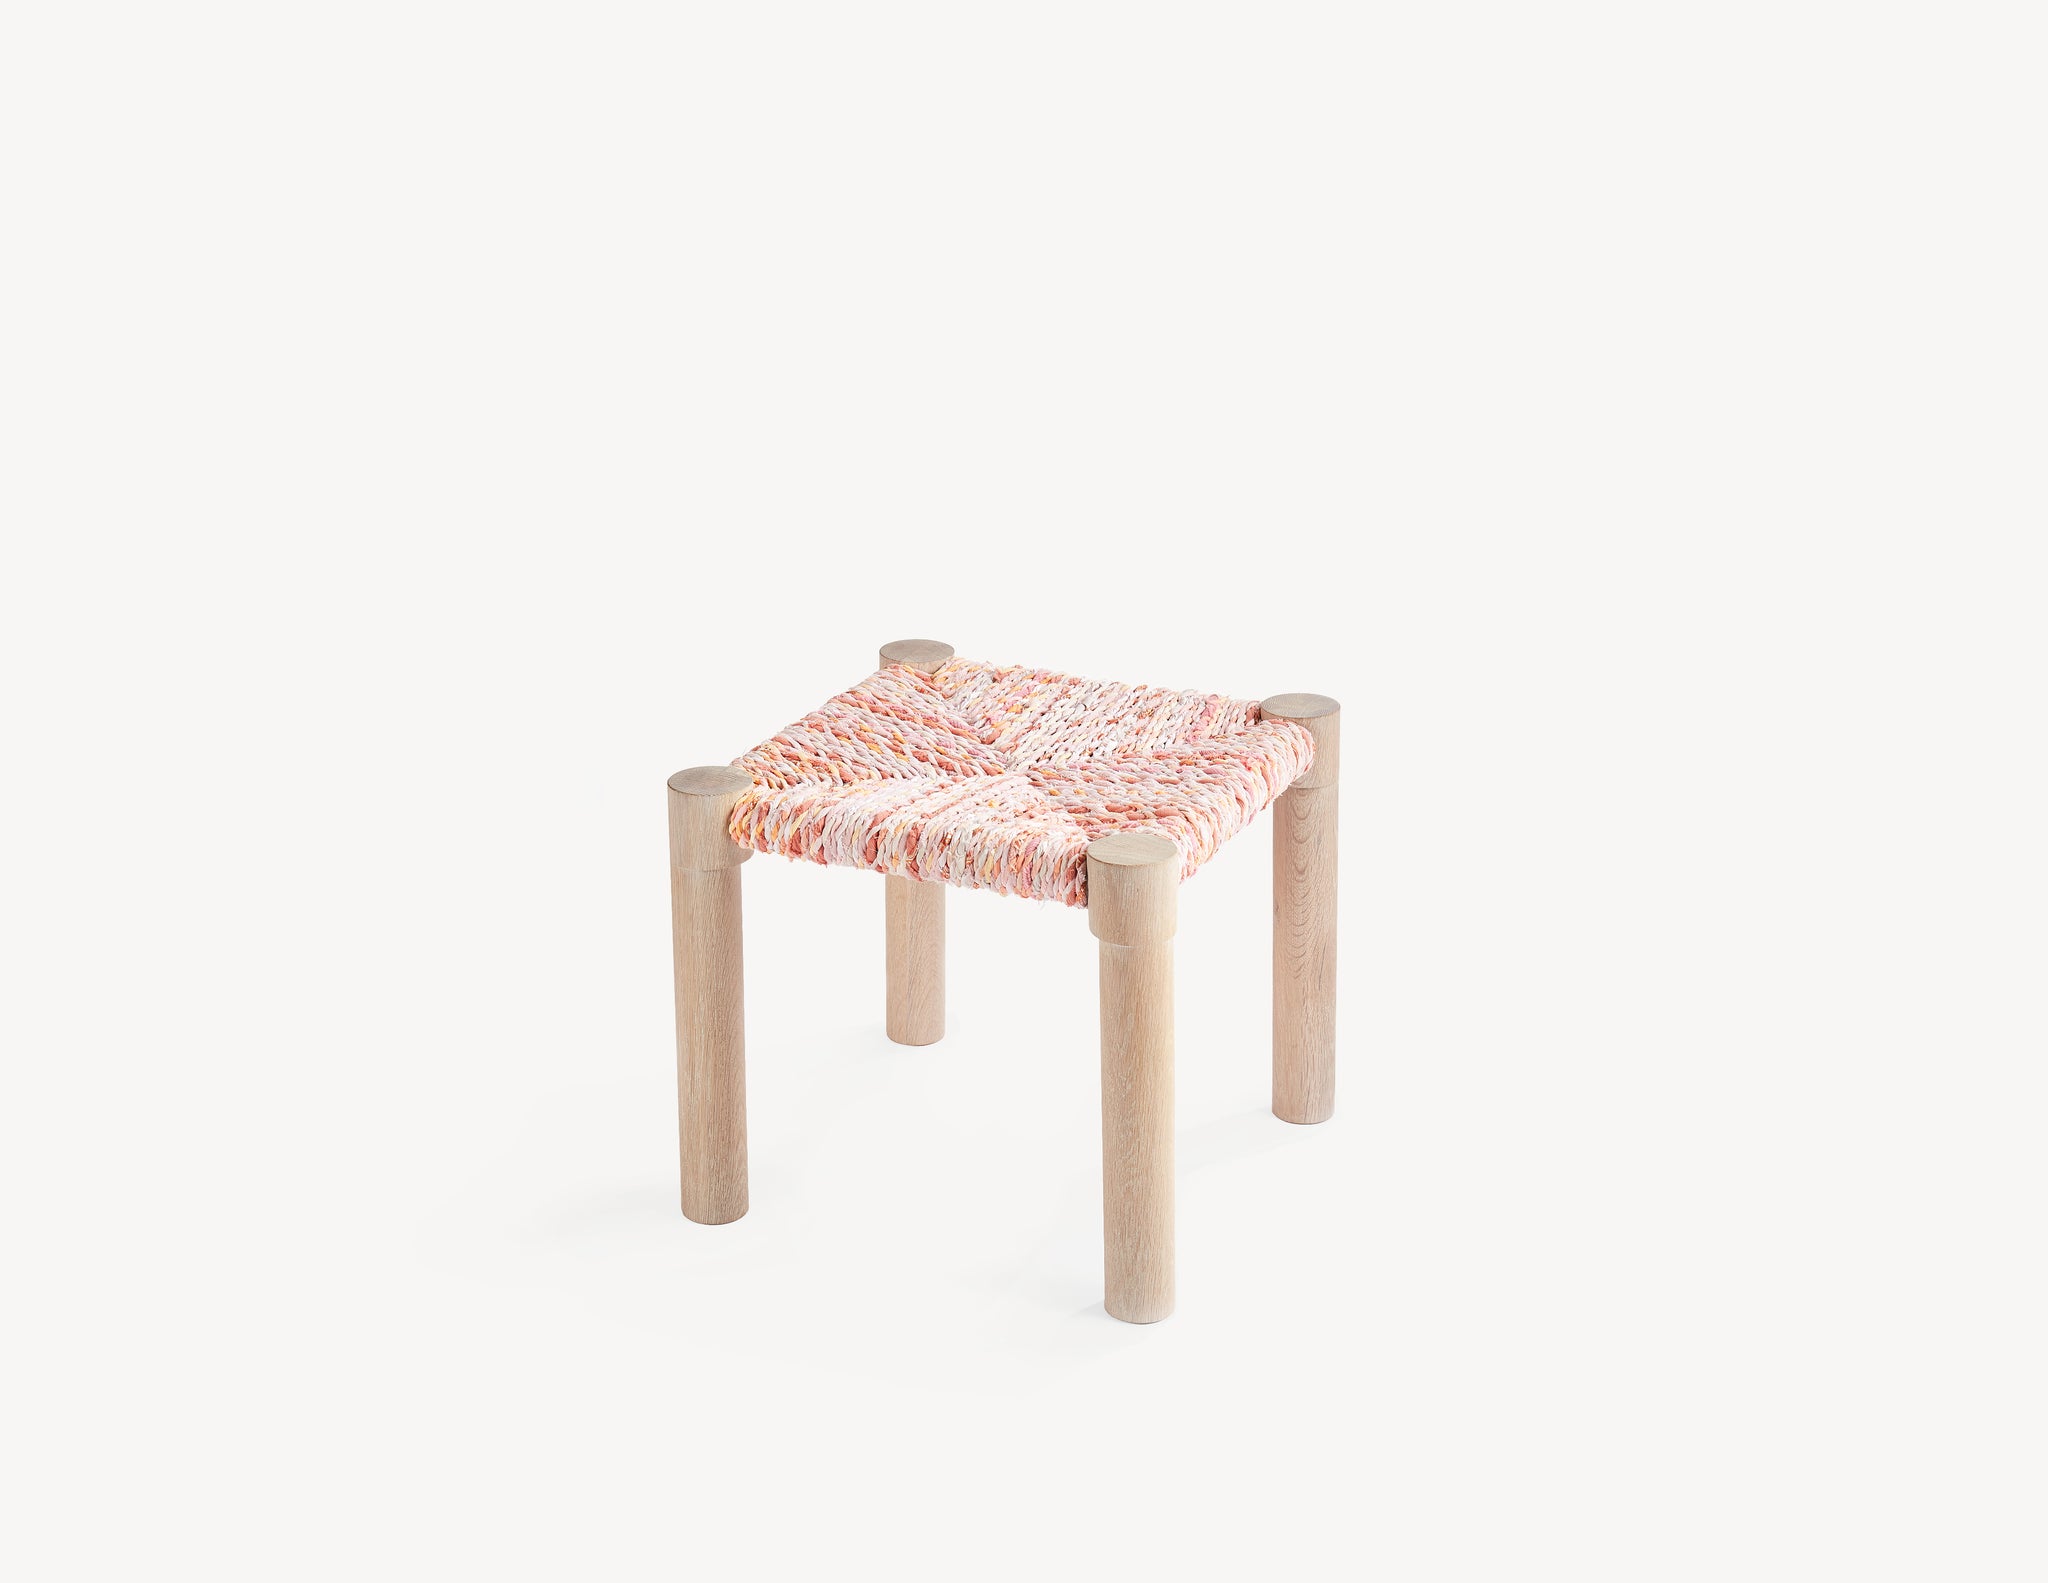 wooden stool with pink woven seat